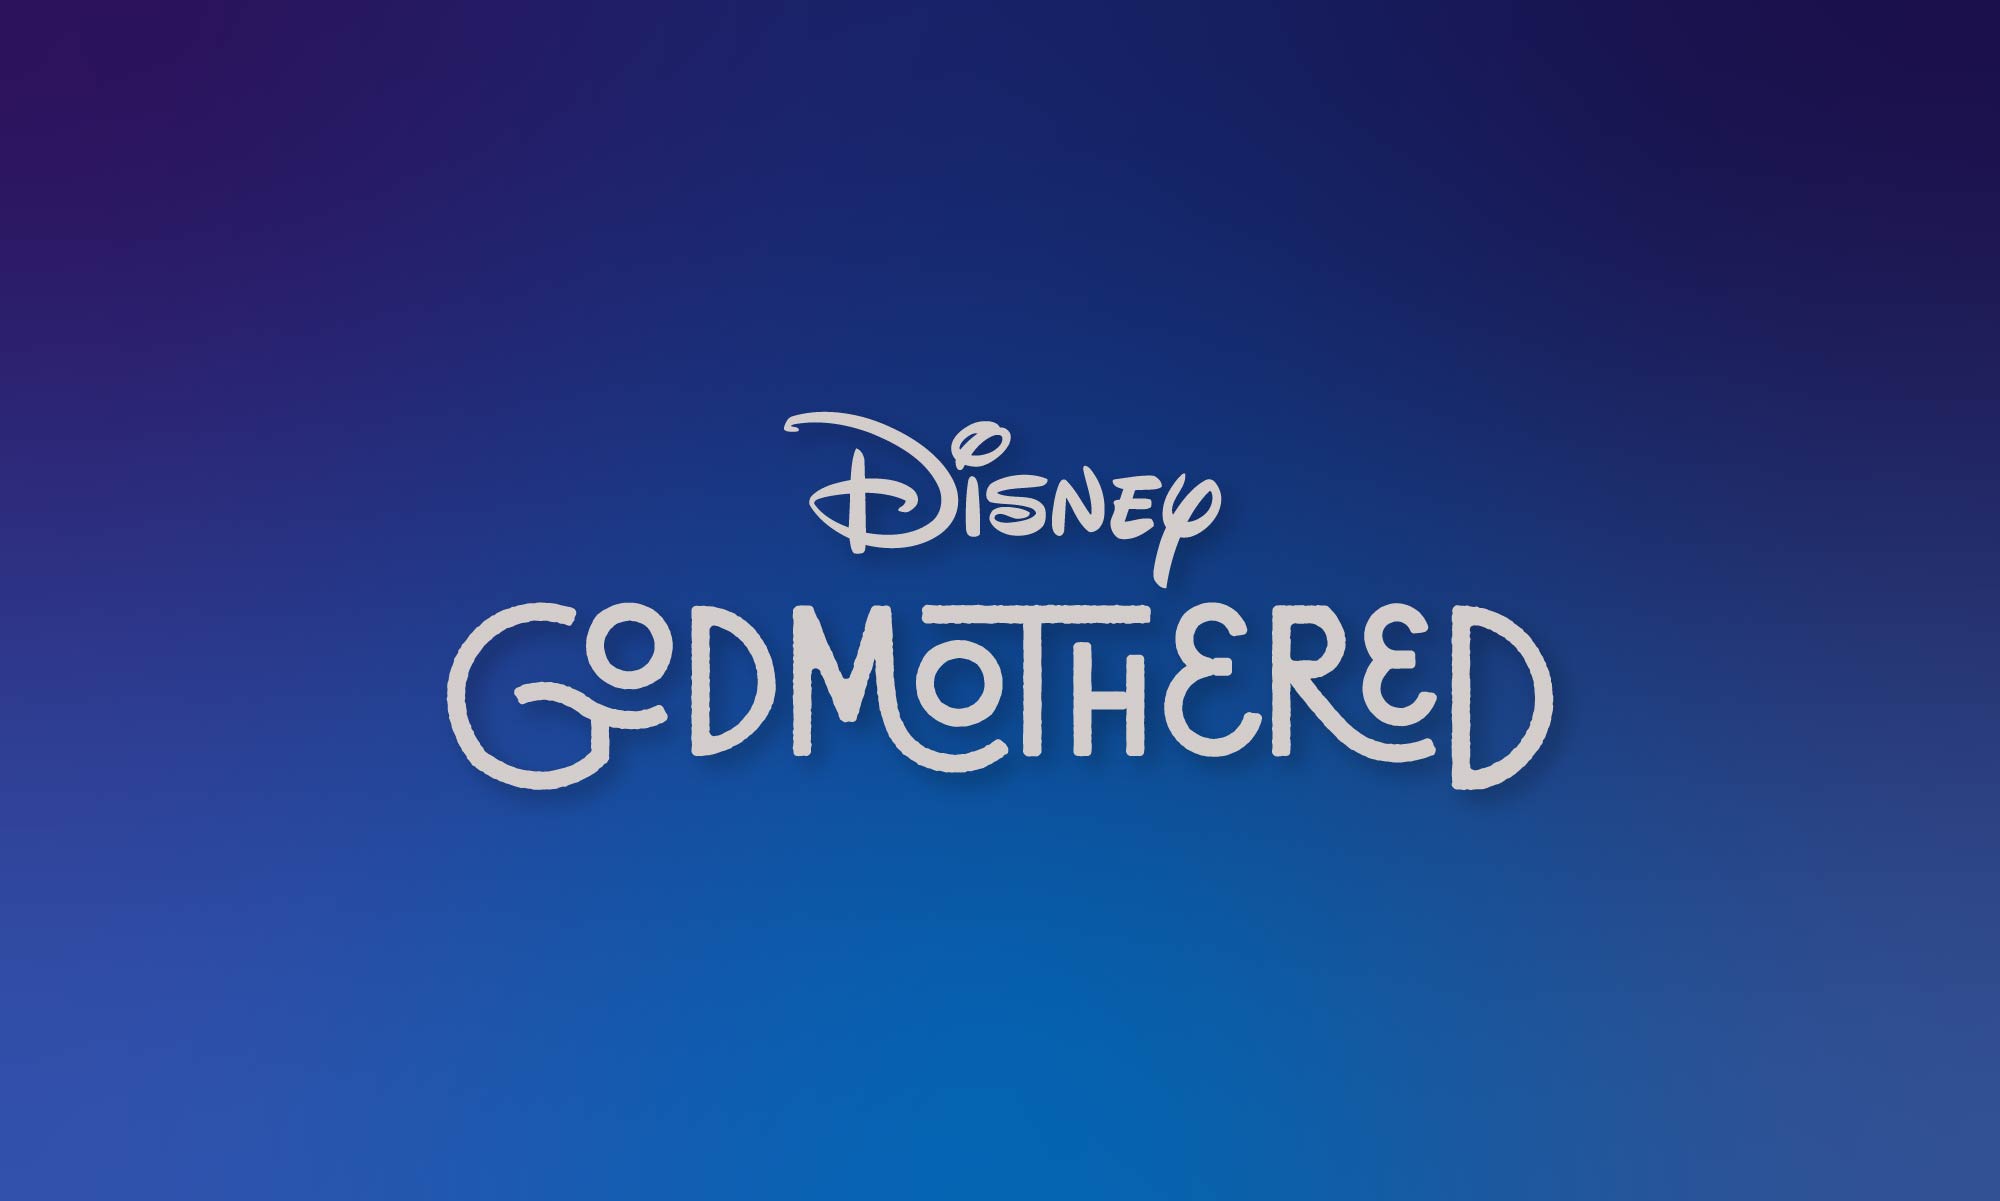 Godmothered Disney Title Treatment by Hoodzpah featuring hand drawn lettering